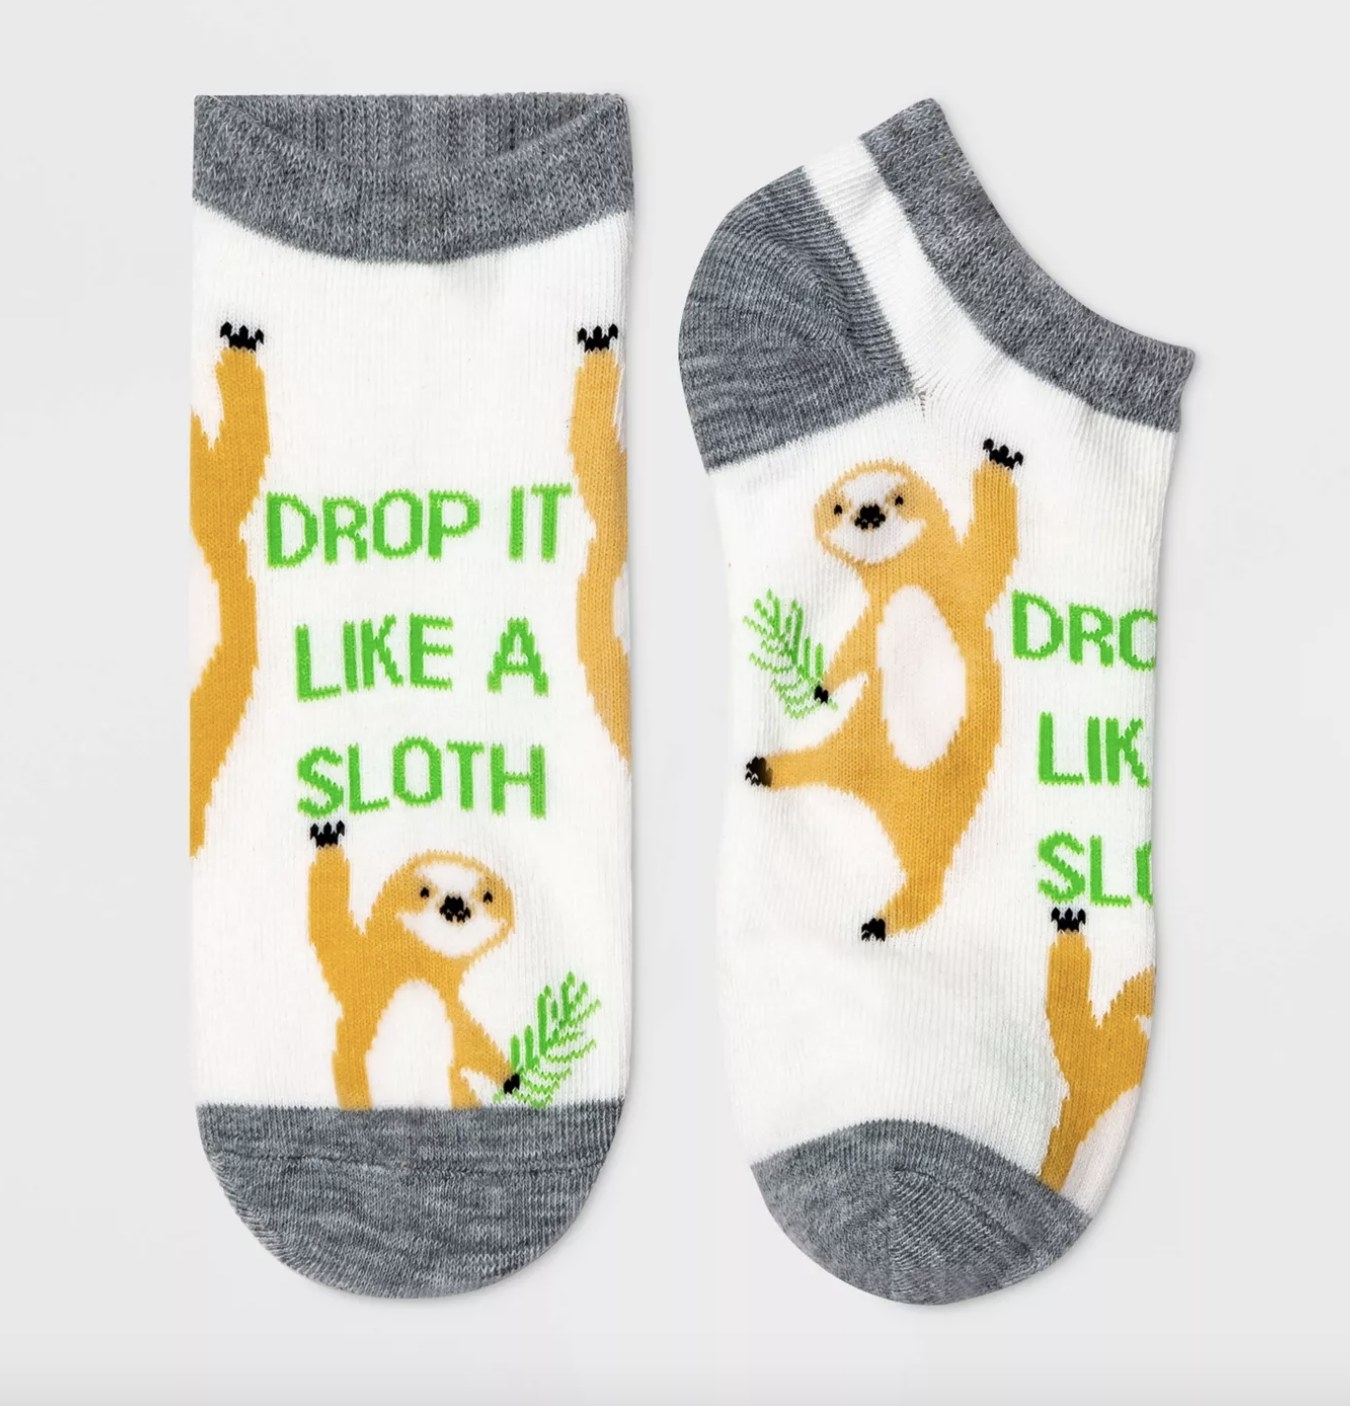 The socks say &quot;DROP IT LIKE A SLOTH&quot; and have tan sloths holding green vegetation